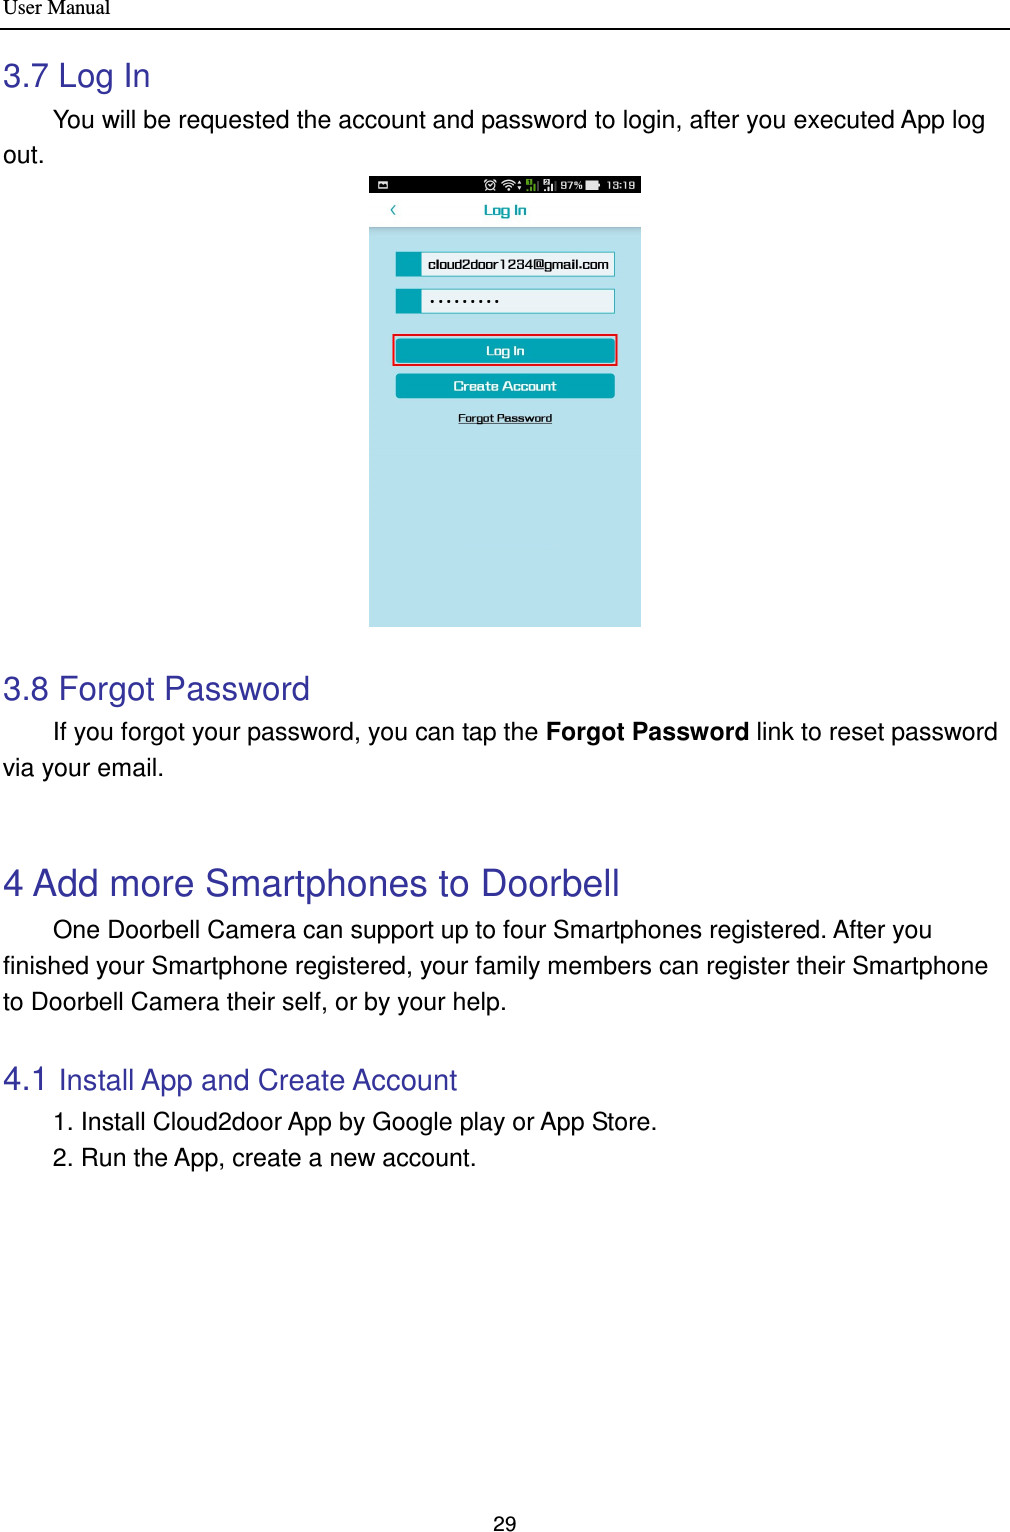 User Manual 29  3.7 Log In         You will be requested the account and password to login, after you executed App log out.   3.8 Forgot Password         If you forgot your password, you can tap the Forgot Password link to reset password via your email.        4 Add more Smartphones to Doorbell   One Doorbell Camera can support up to four Smartphones registered. After you finished your Smartphone registered, your family members can register their Smartphone to Doorbell Camera their self, or by your help.    4.1 Install App and Create Account     1. Install Cloud2door App by Google play or App Store.   2. Run the App, create a new account.   